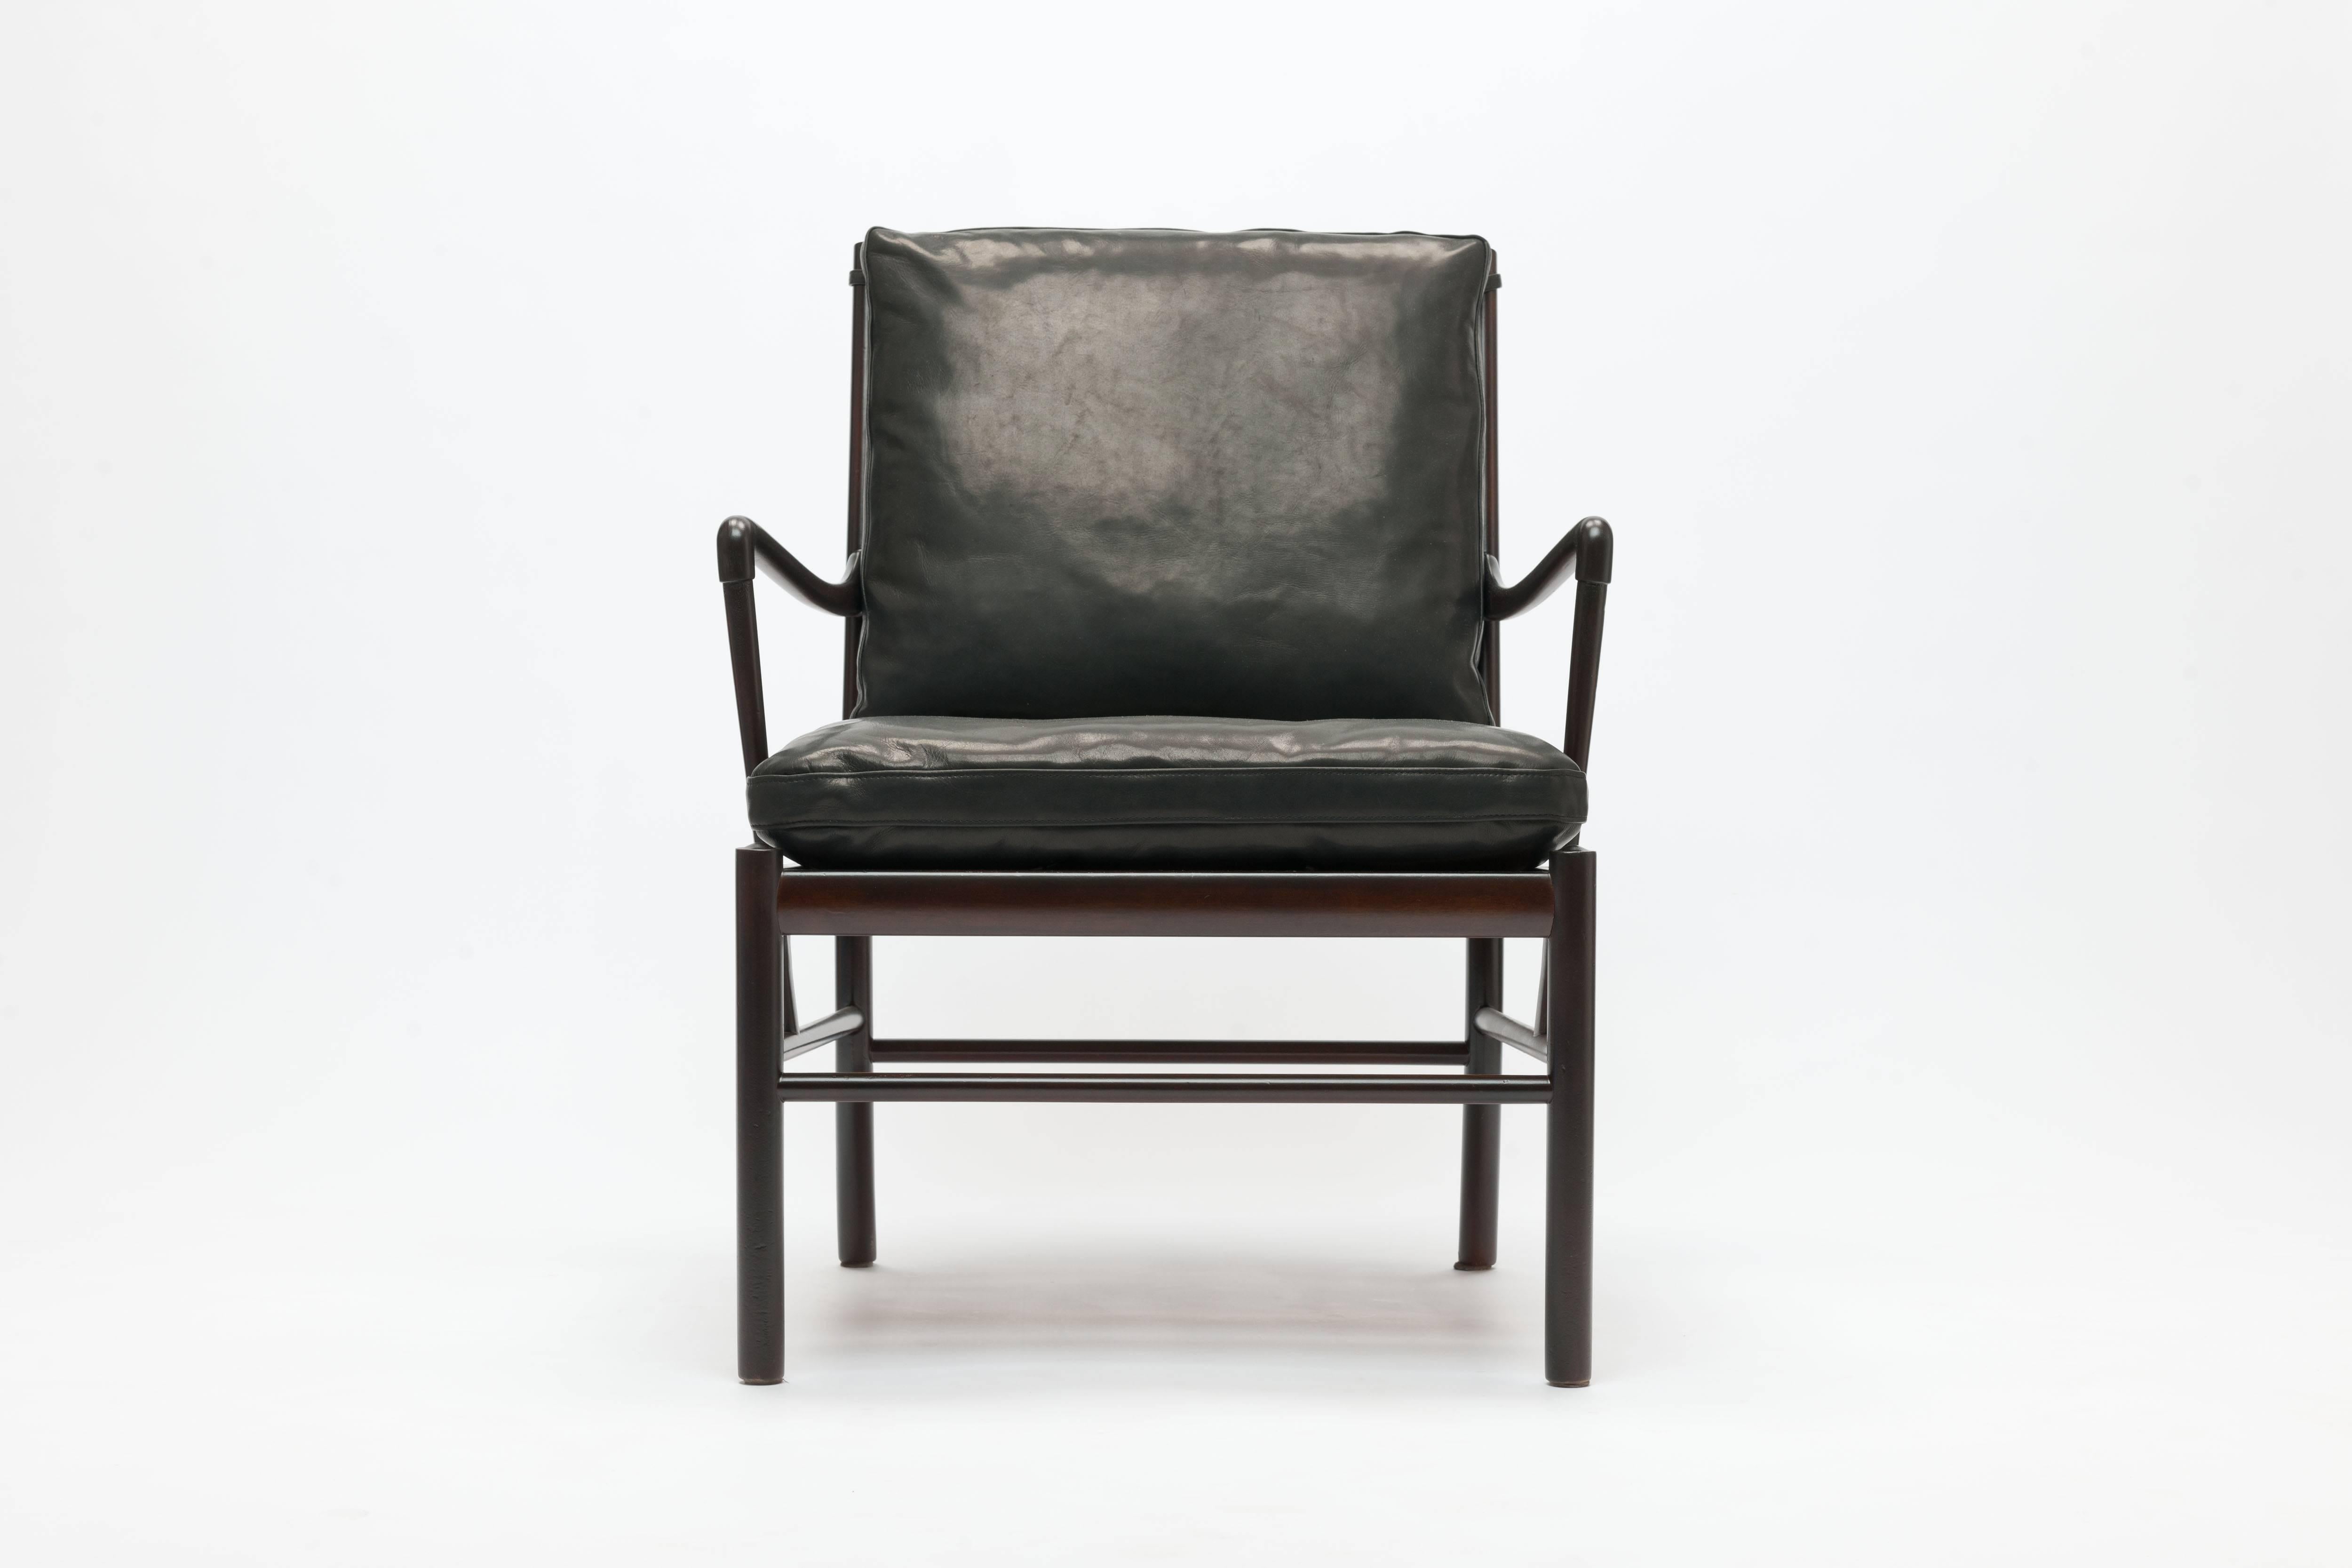 Danish Black Leather Ole Wanscher Colonial Chair by Poul Jeppesen, Denmark